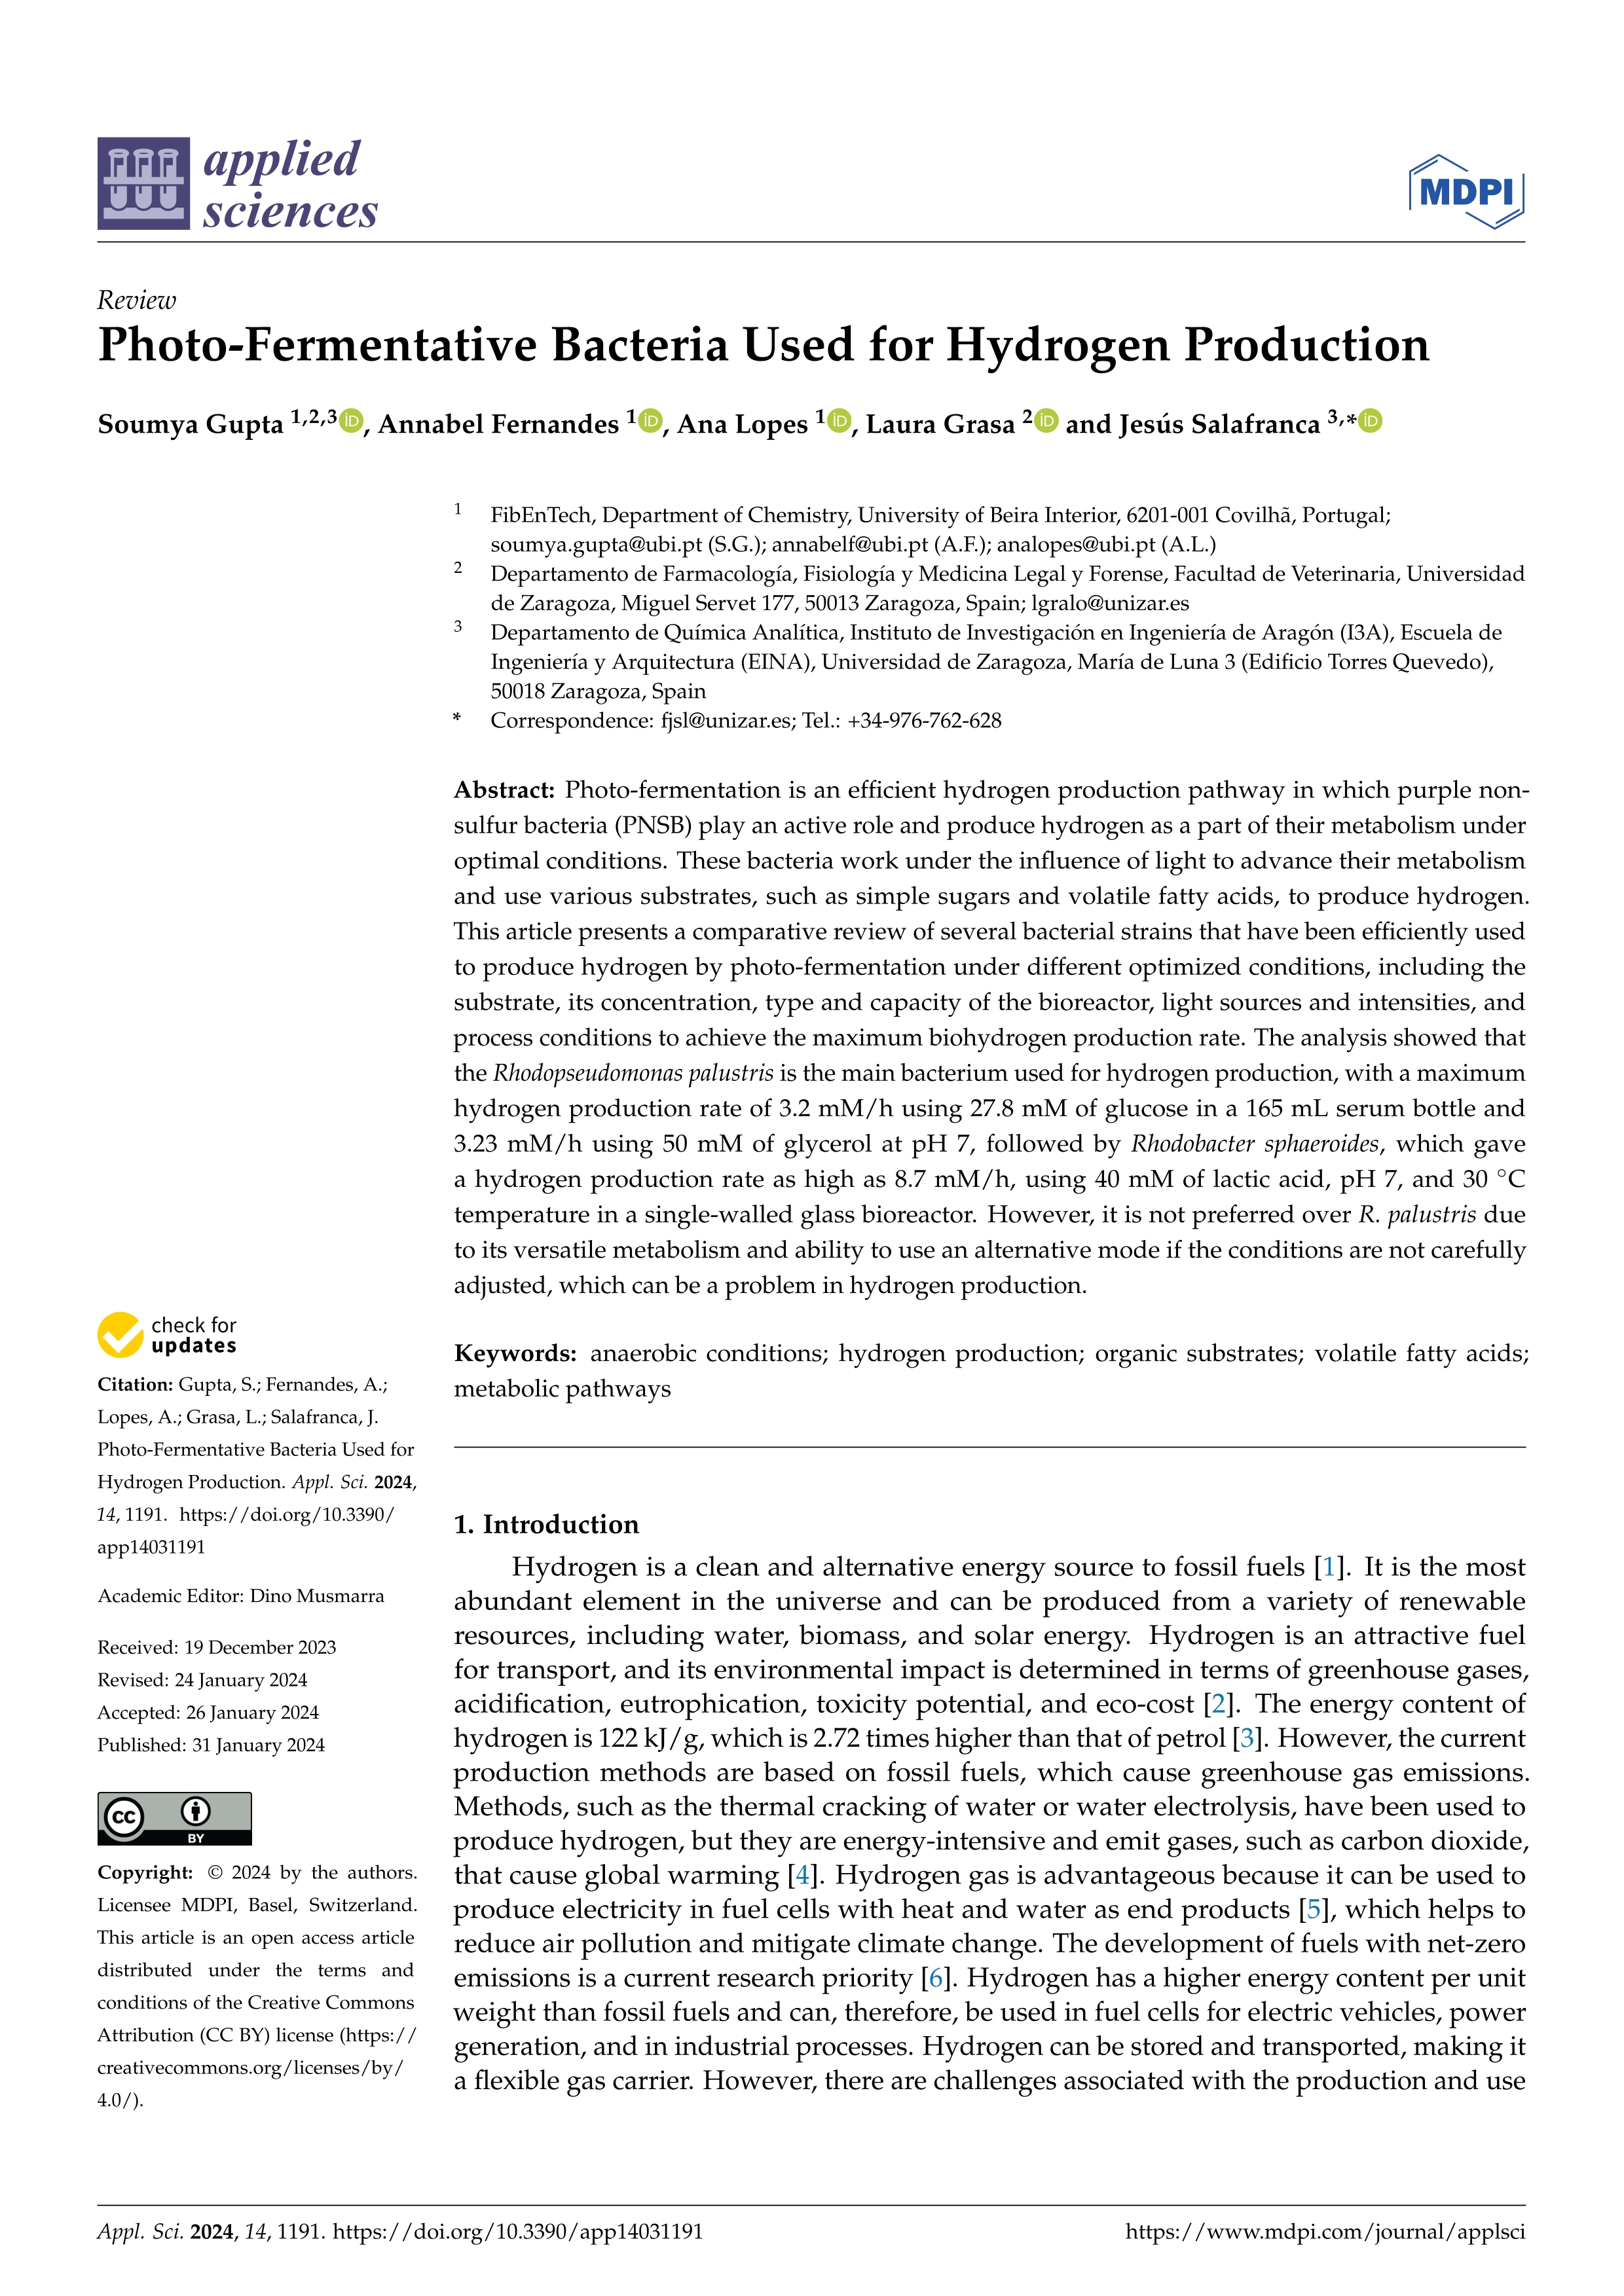 Photo-Fermentative Bacteria Used for Hydrogen Production